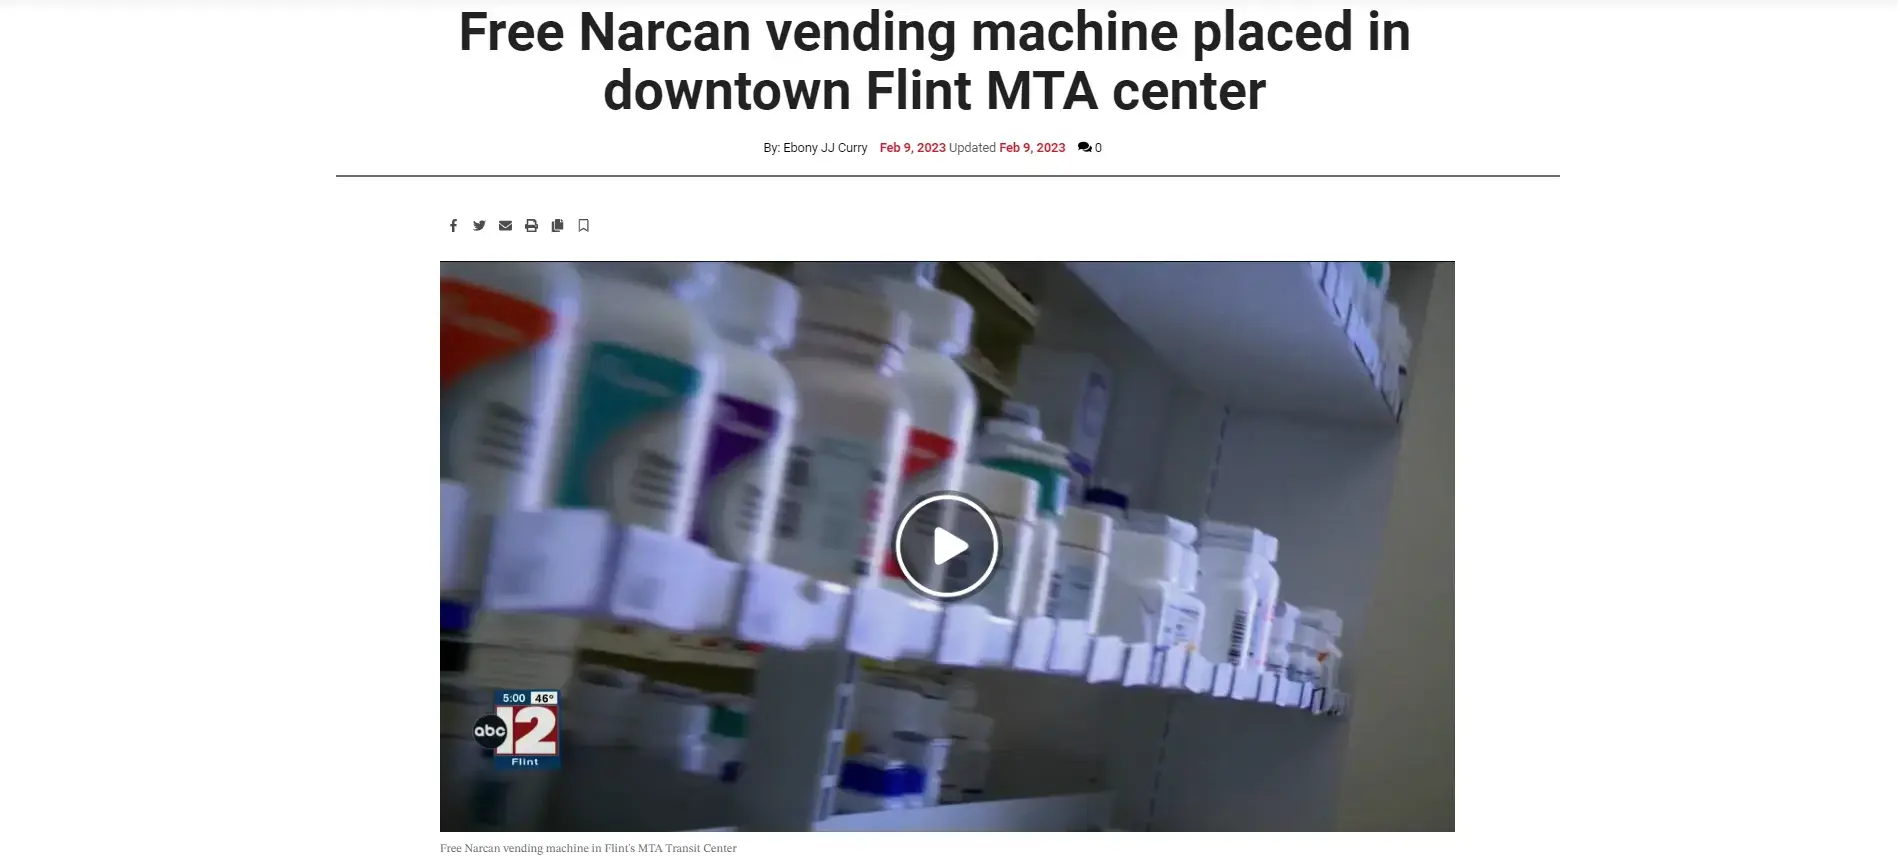 Link to an article regarding about a narcan vending machine in downtown flint MTA center.